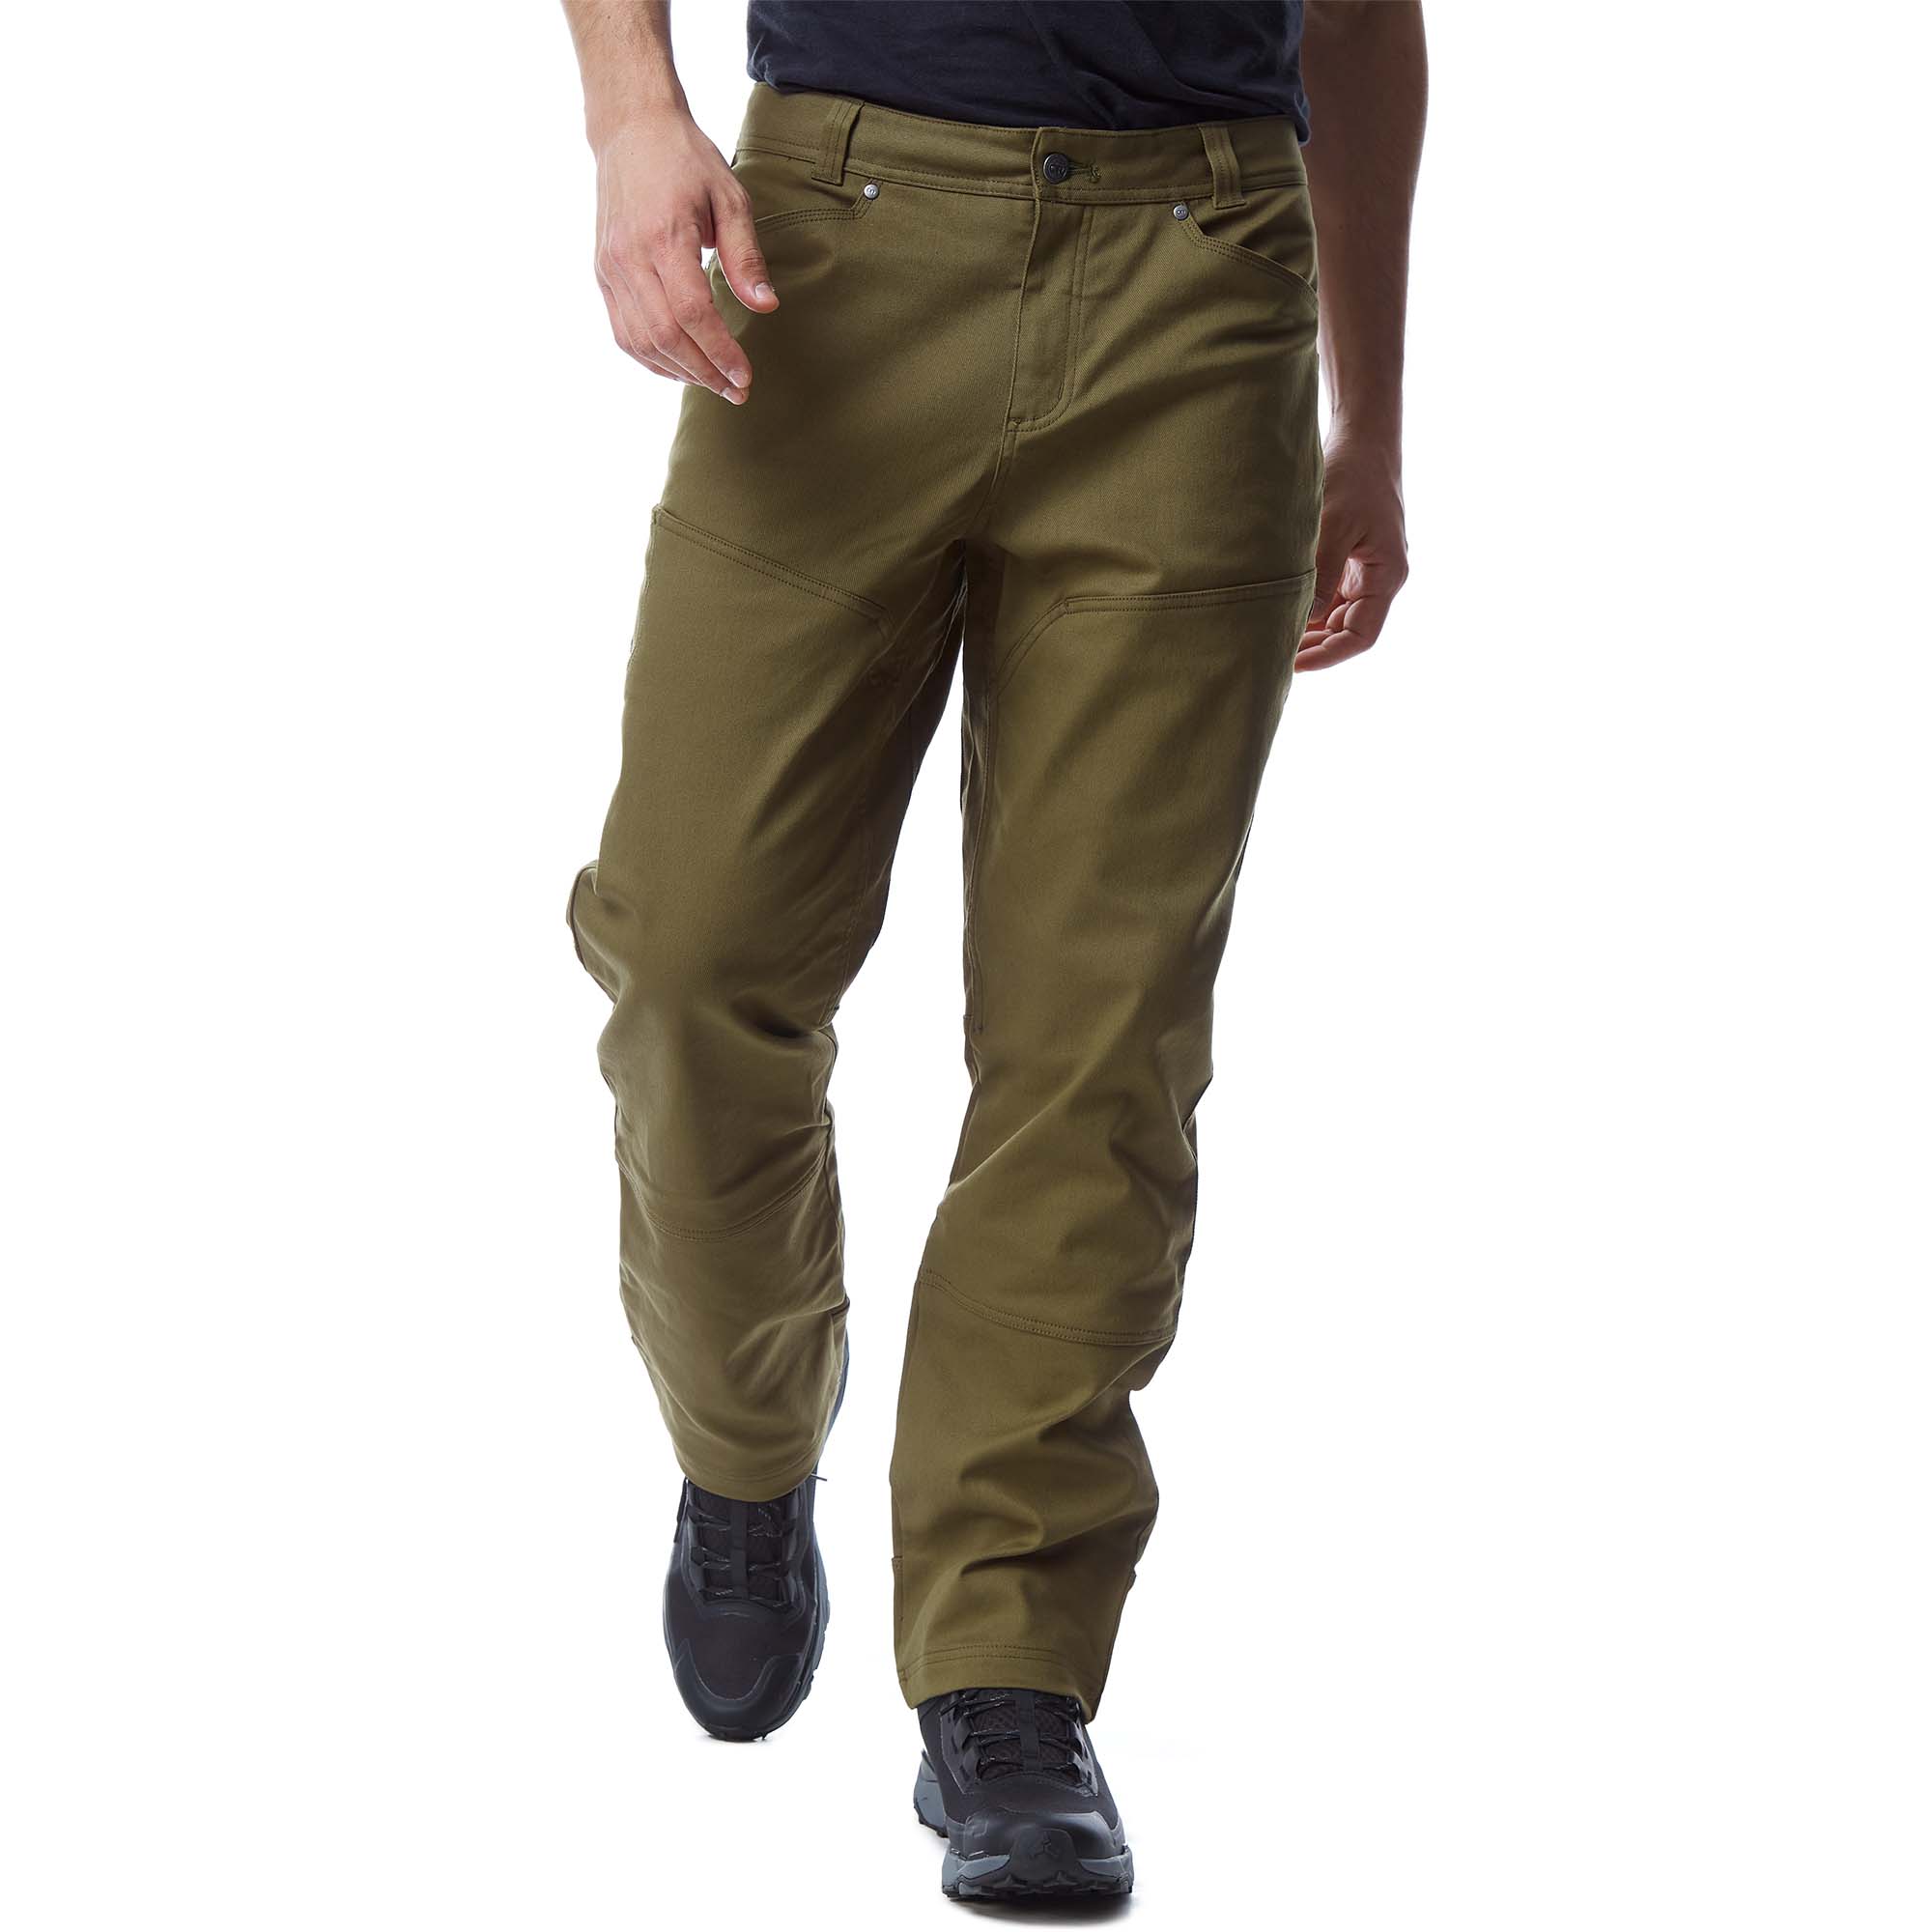 mens insulated work pants products for sale  eBay